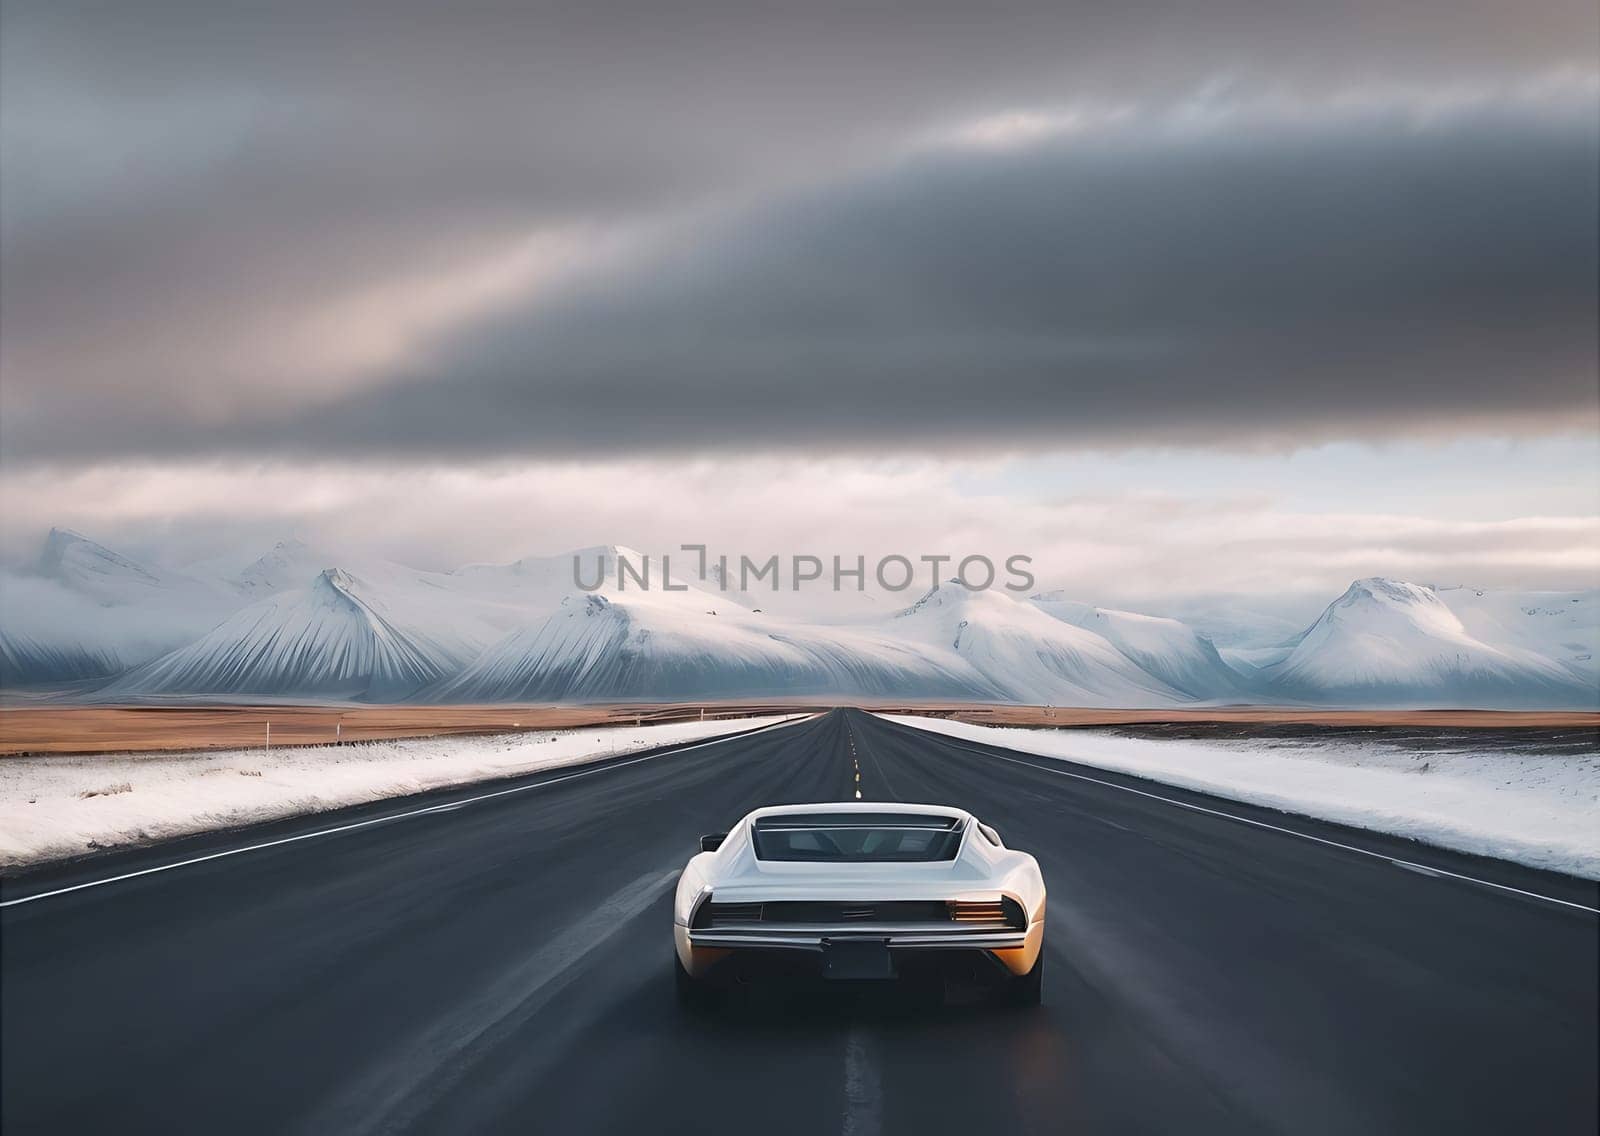 A car drives down a road surrounded by majestic mountains.